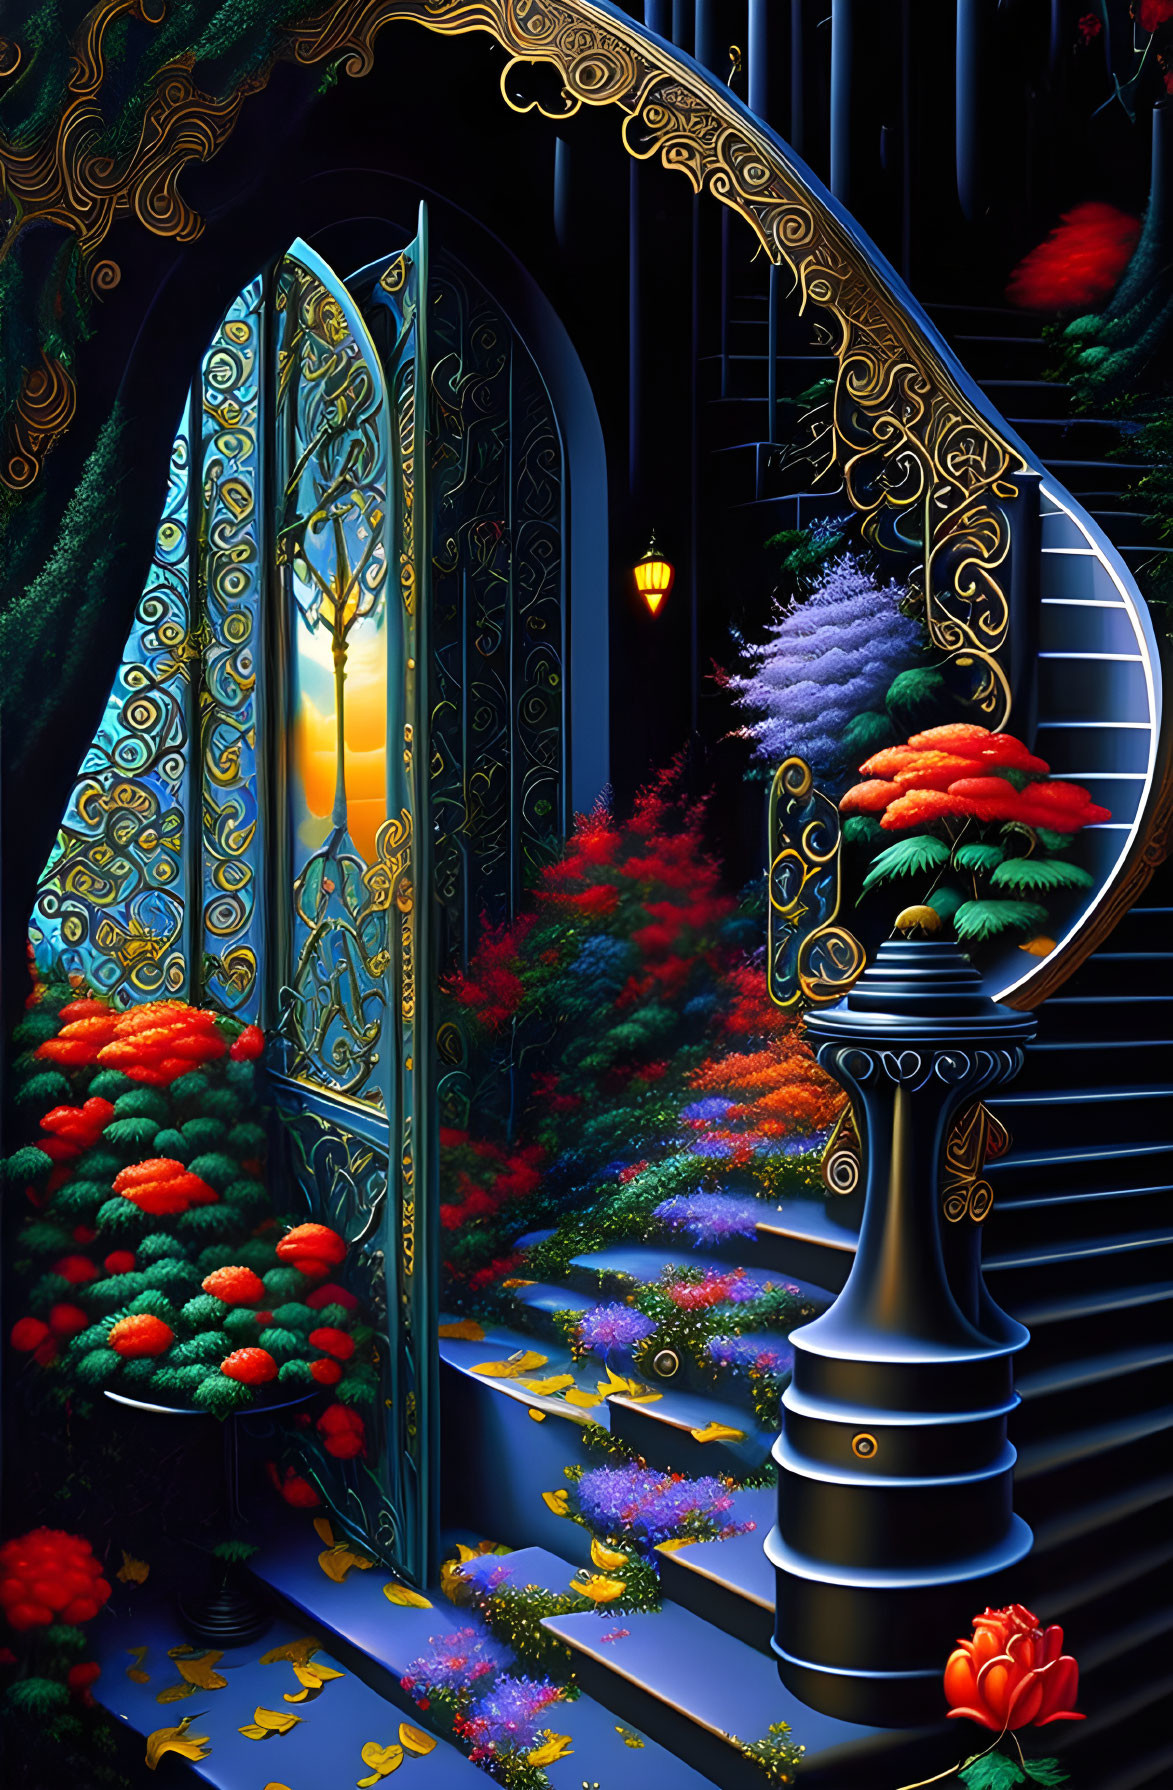 Ornate illuminated doorway in night-time garden with vibrant flowers